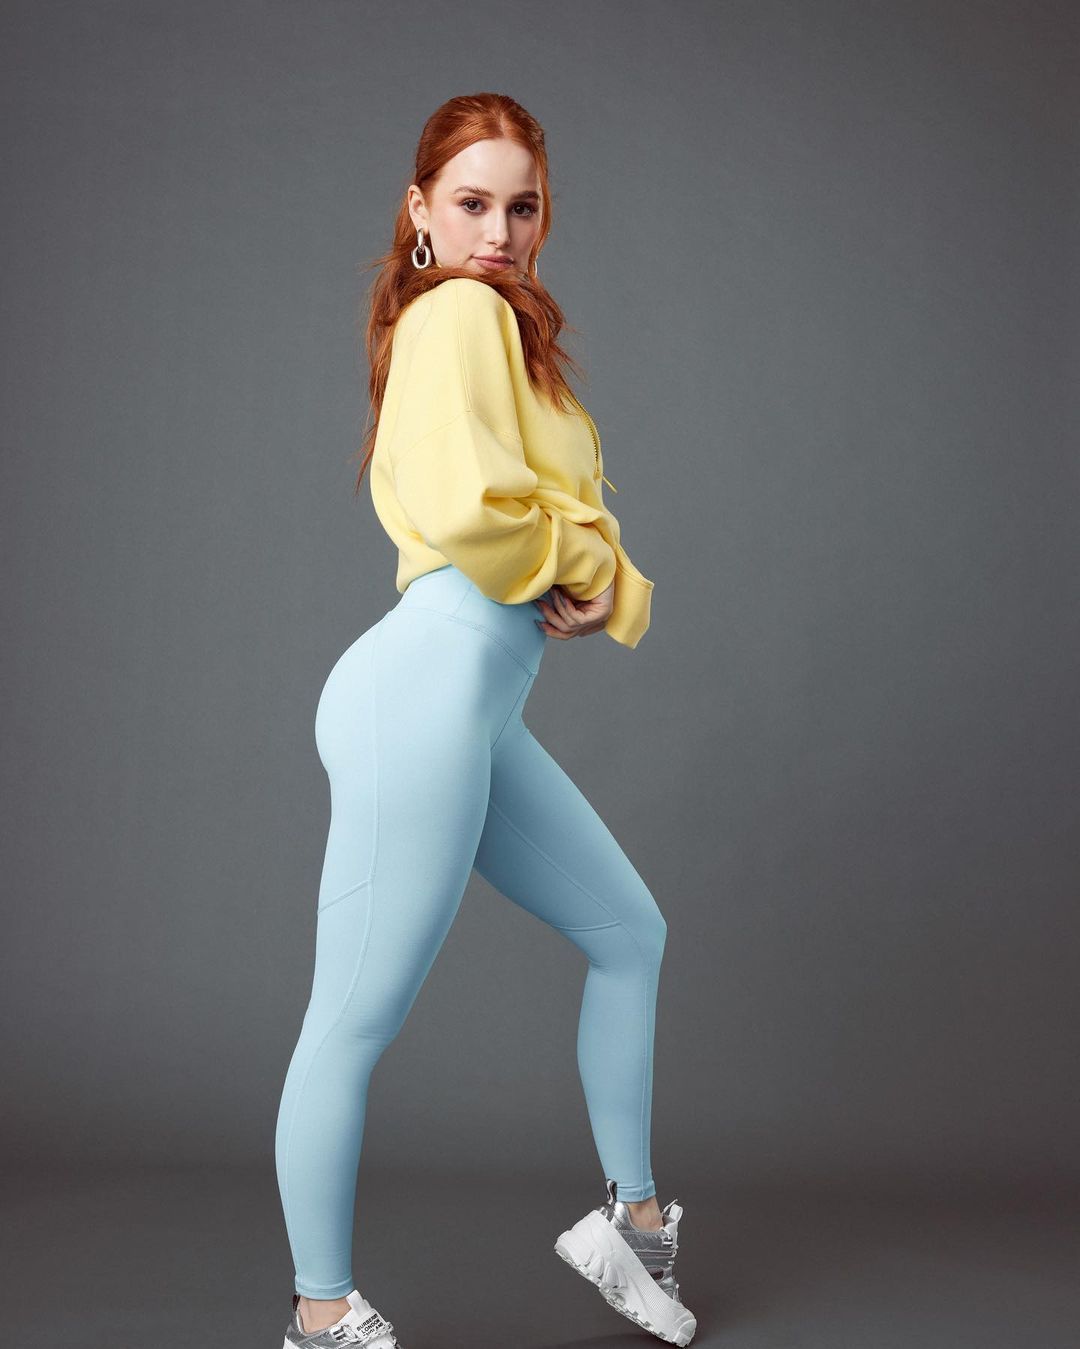 Madelaine-Petsch-Sexy-Collection-8-thefappeningblog.com_-1.jpg